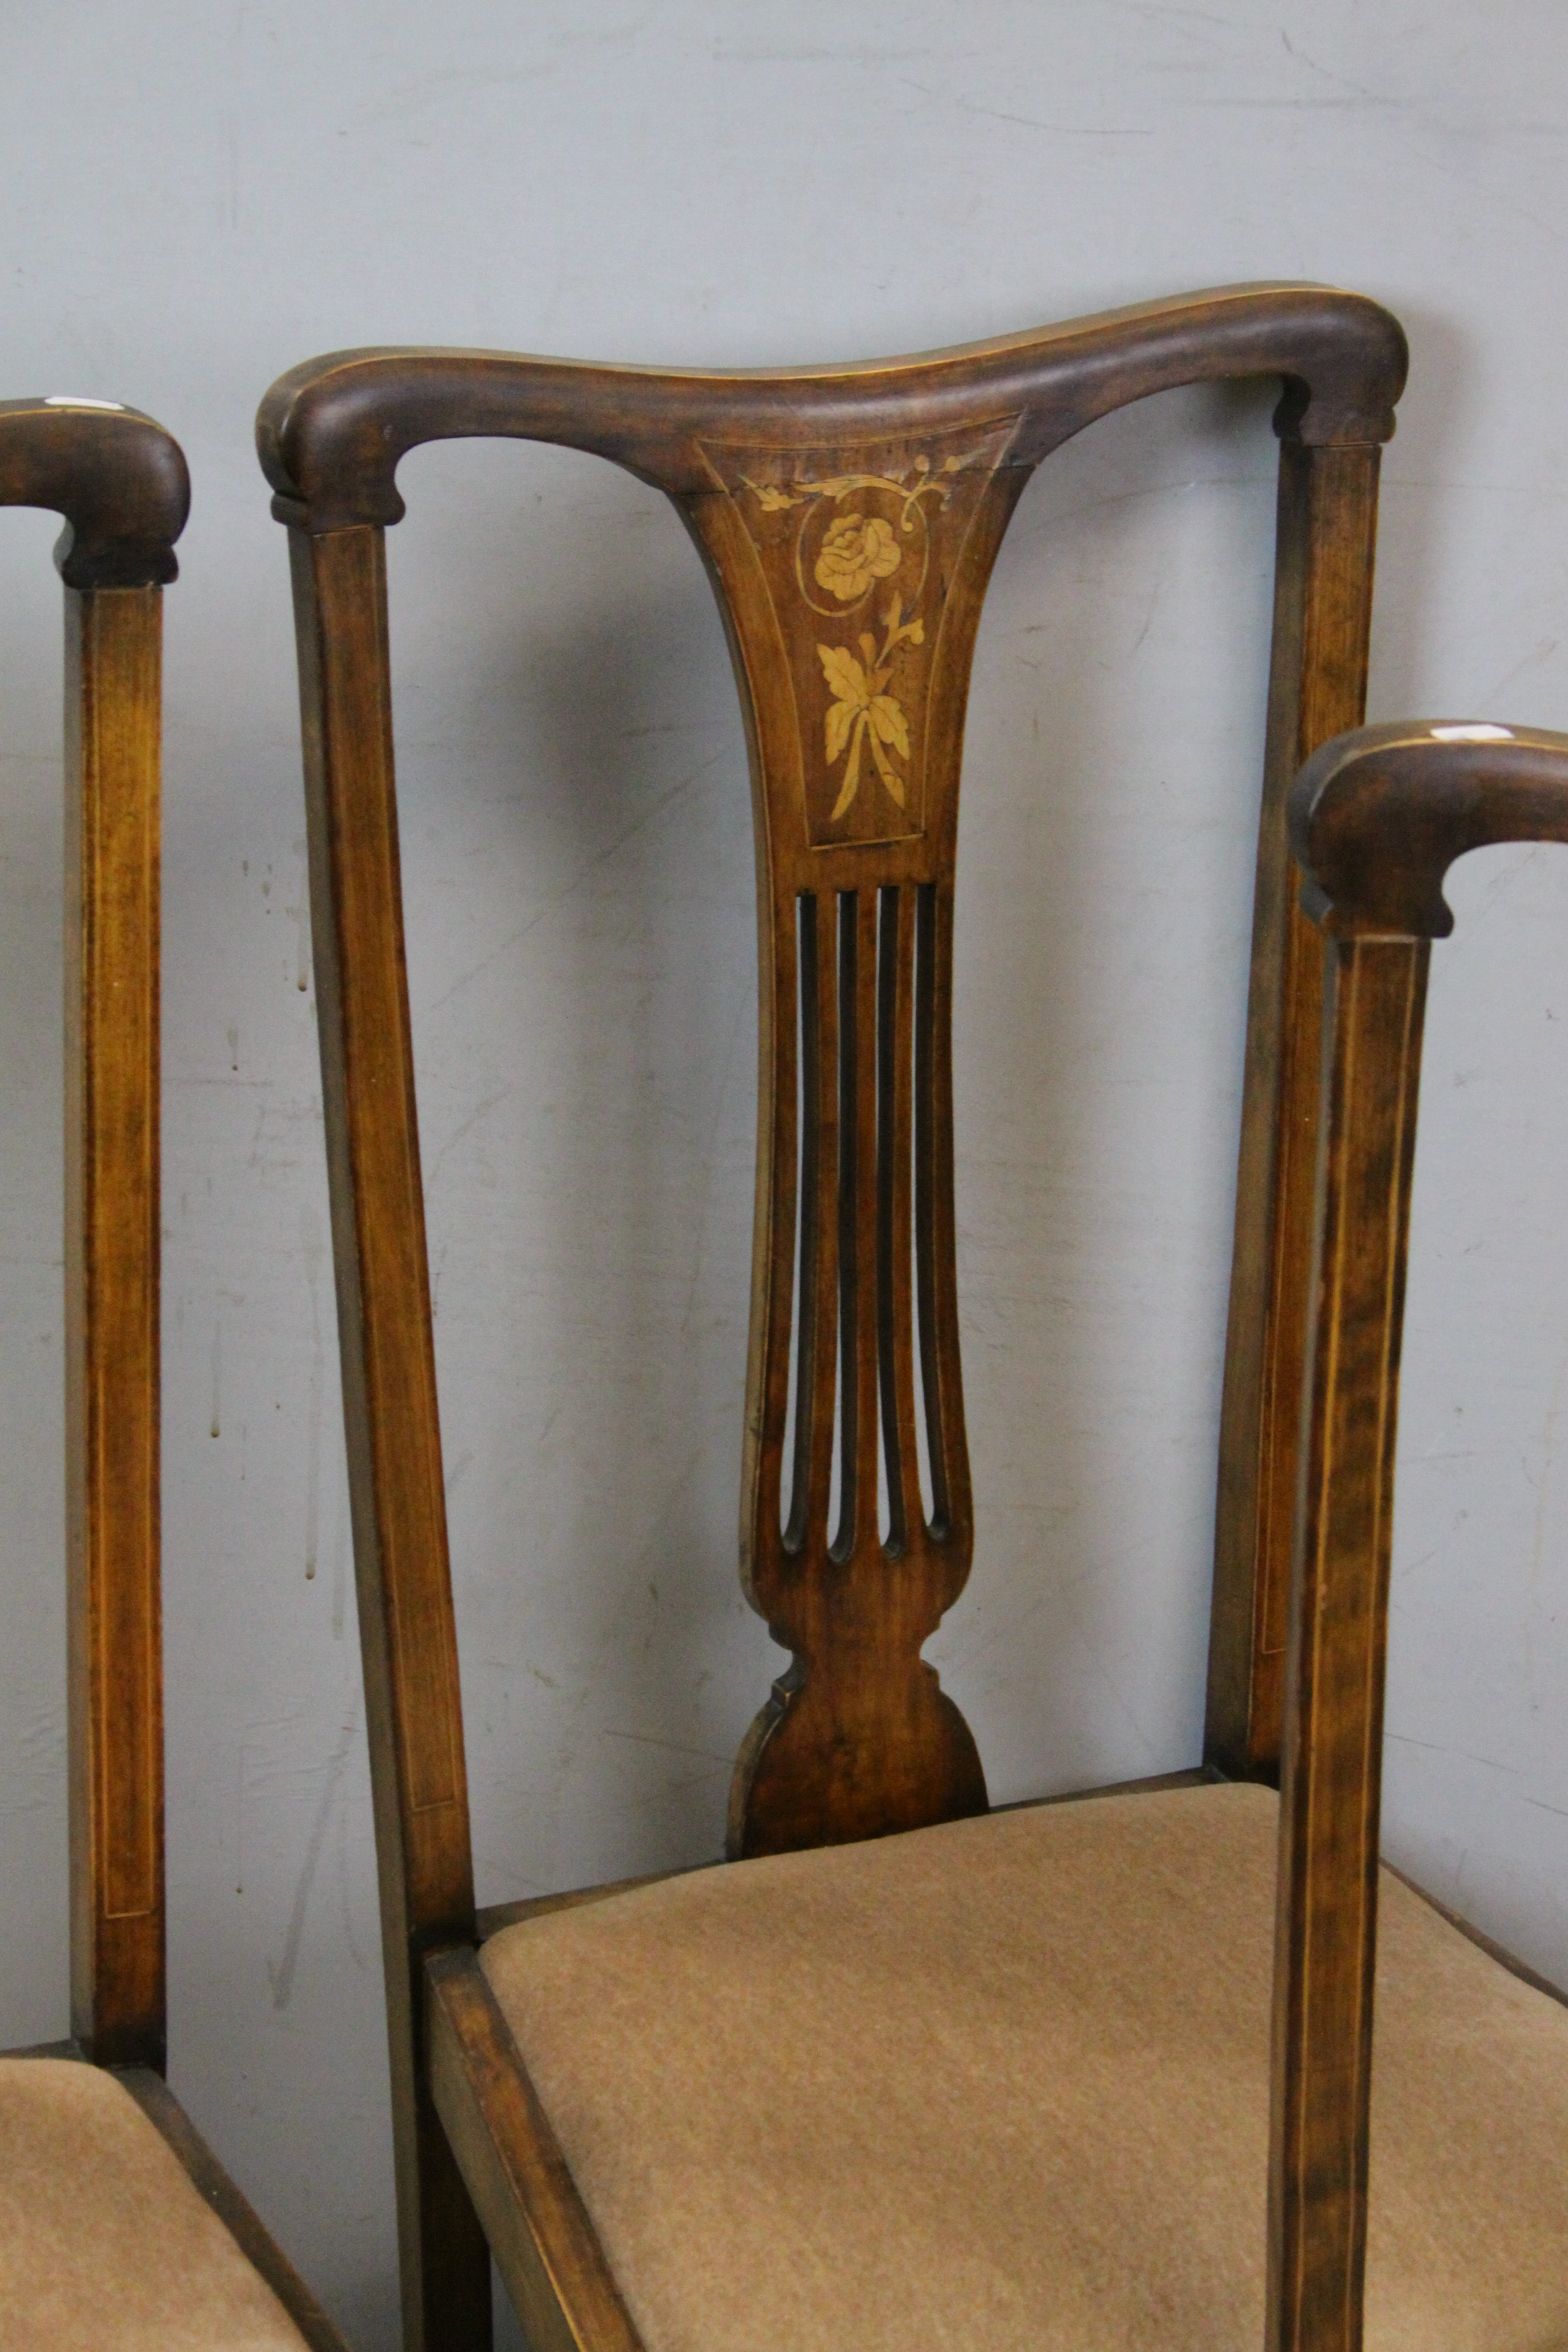 Set of Four Early 20th century Dining Chairs with Floral Inlaid and Pierced Splats, Drop in Seats - Image 4 of 5